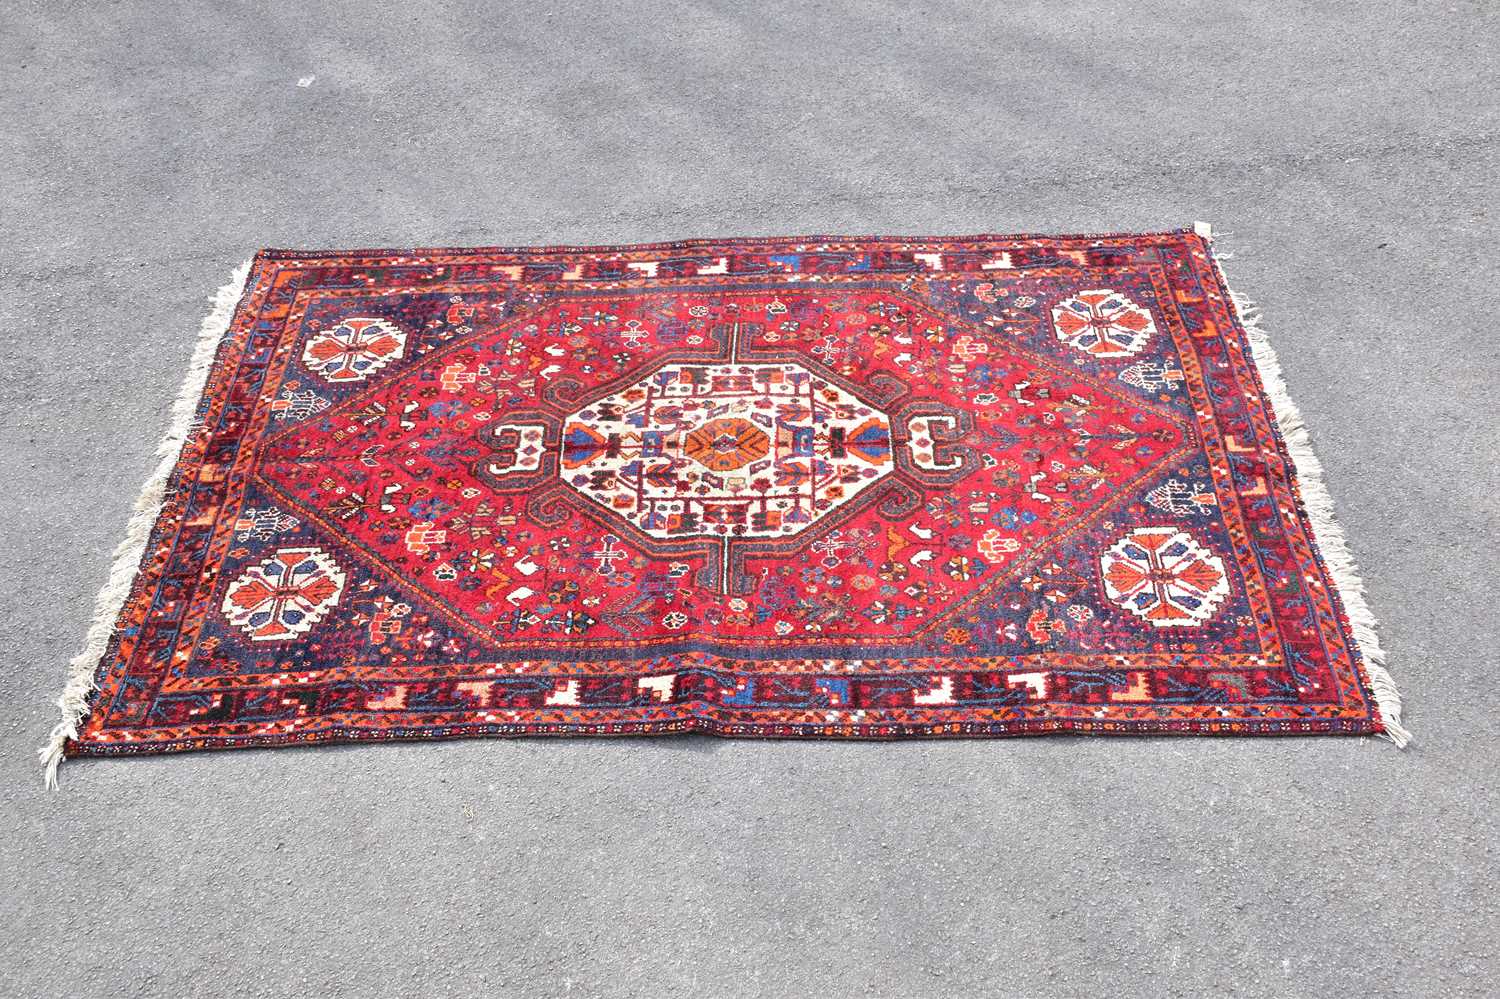 A red ground wool rug with central geometric pattern, 209 x 138cm.